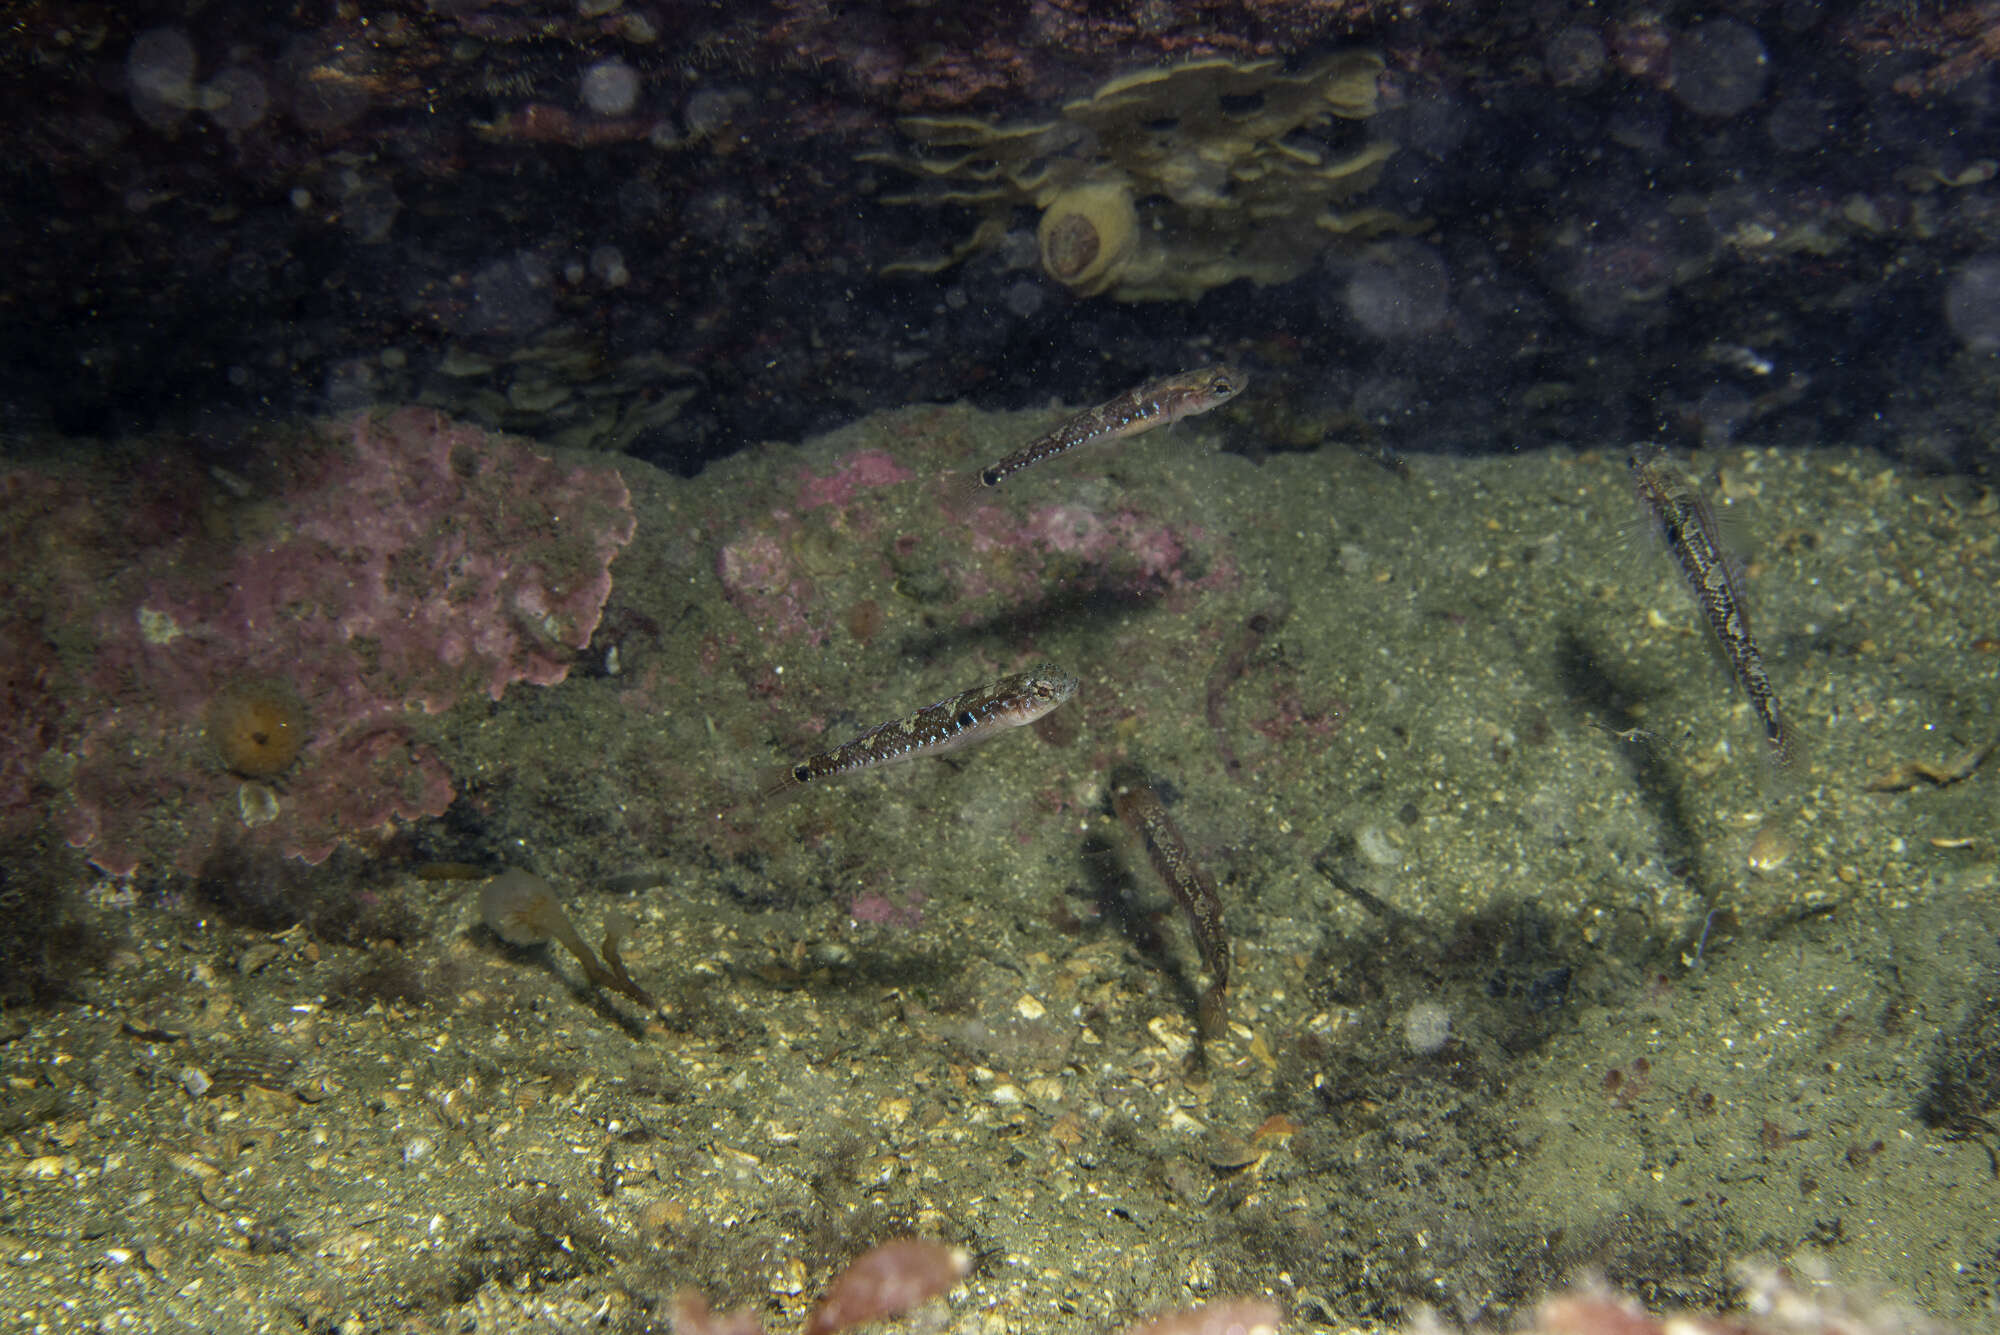 Image of Spotted goby